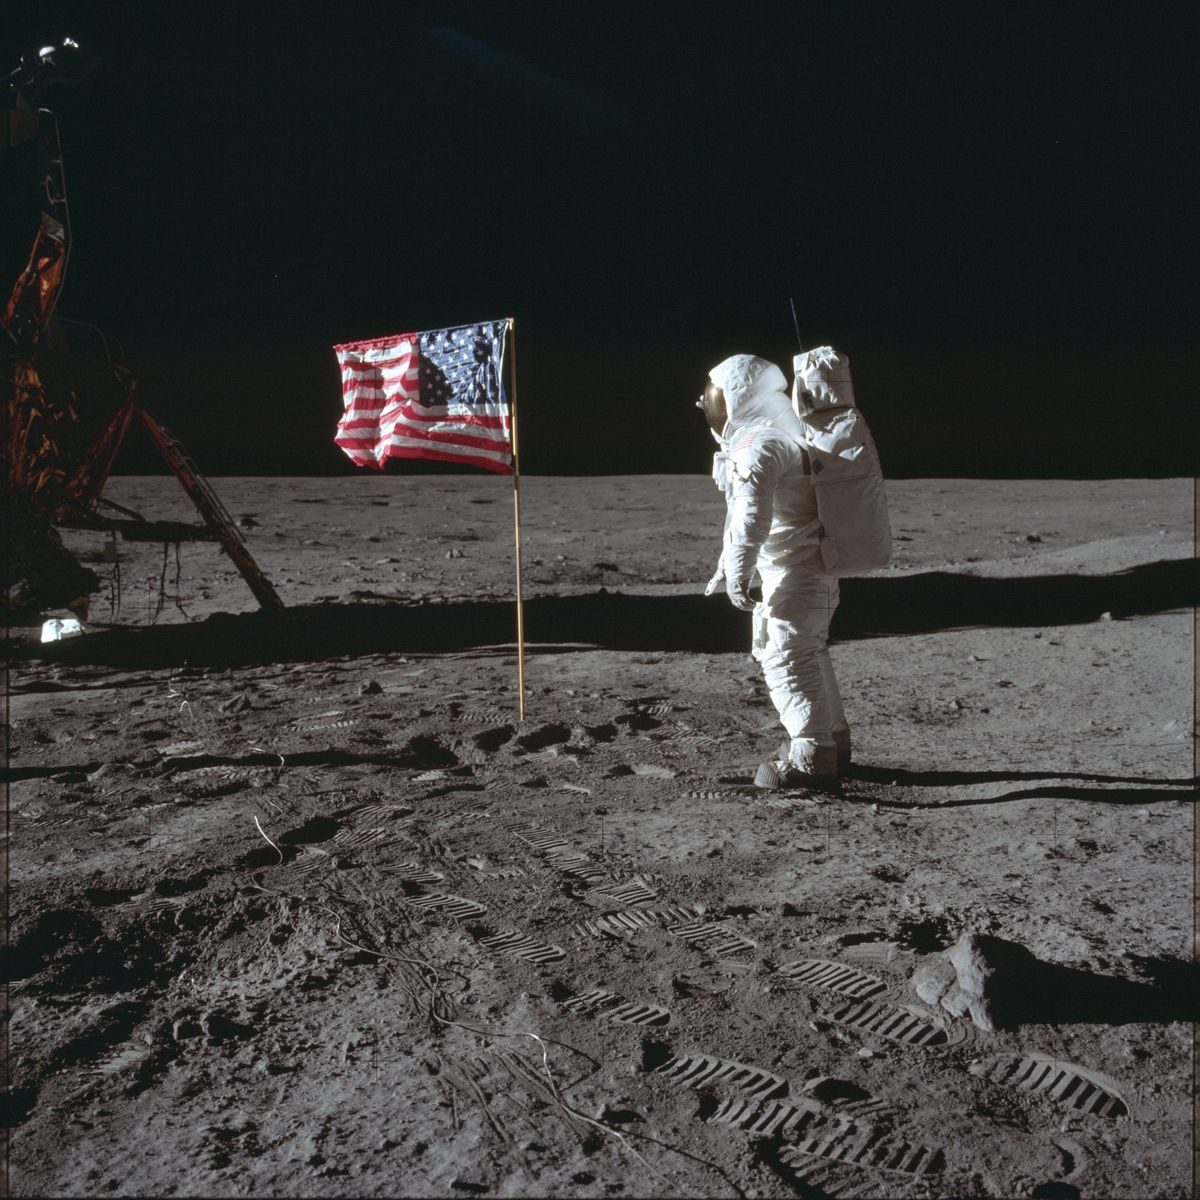 FILE - In this July 20, 1969 photo made available by NASA, astronaut Buzz Aldrin Jr. poses for a photograph beside the U.S. flag on the moon during the Apollo 11 mission. Aldrin and fellow astronaut Neil Armstrong were the first men to walk on the lunar s